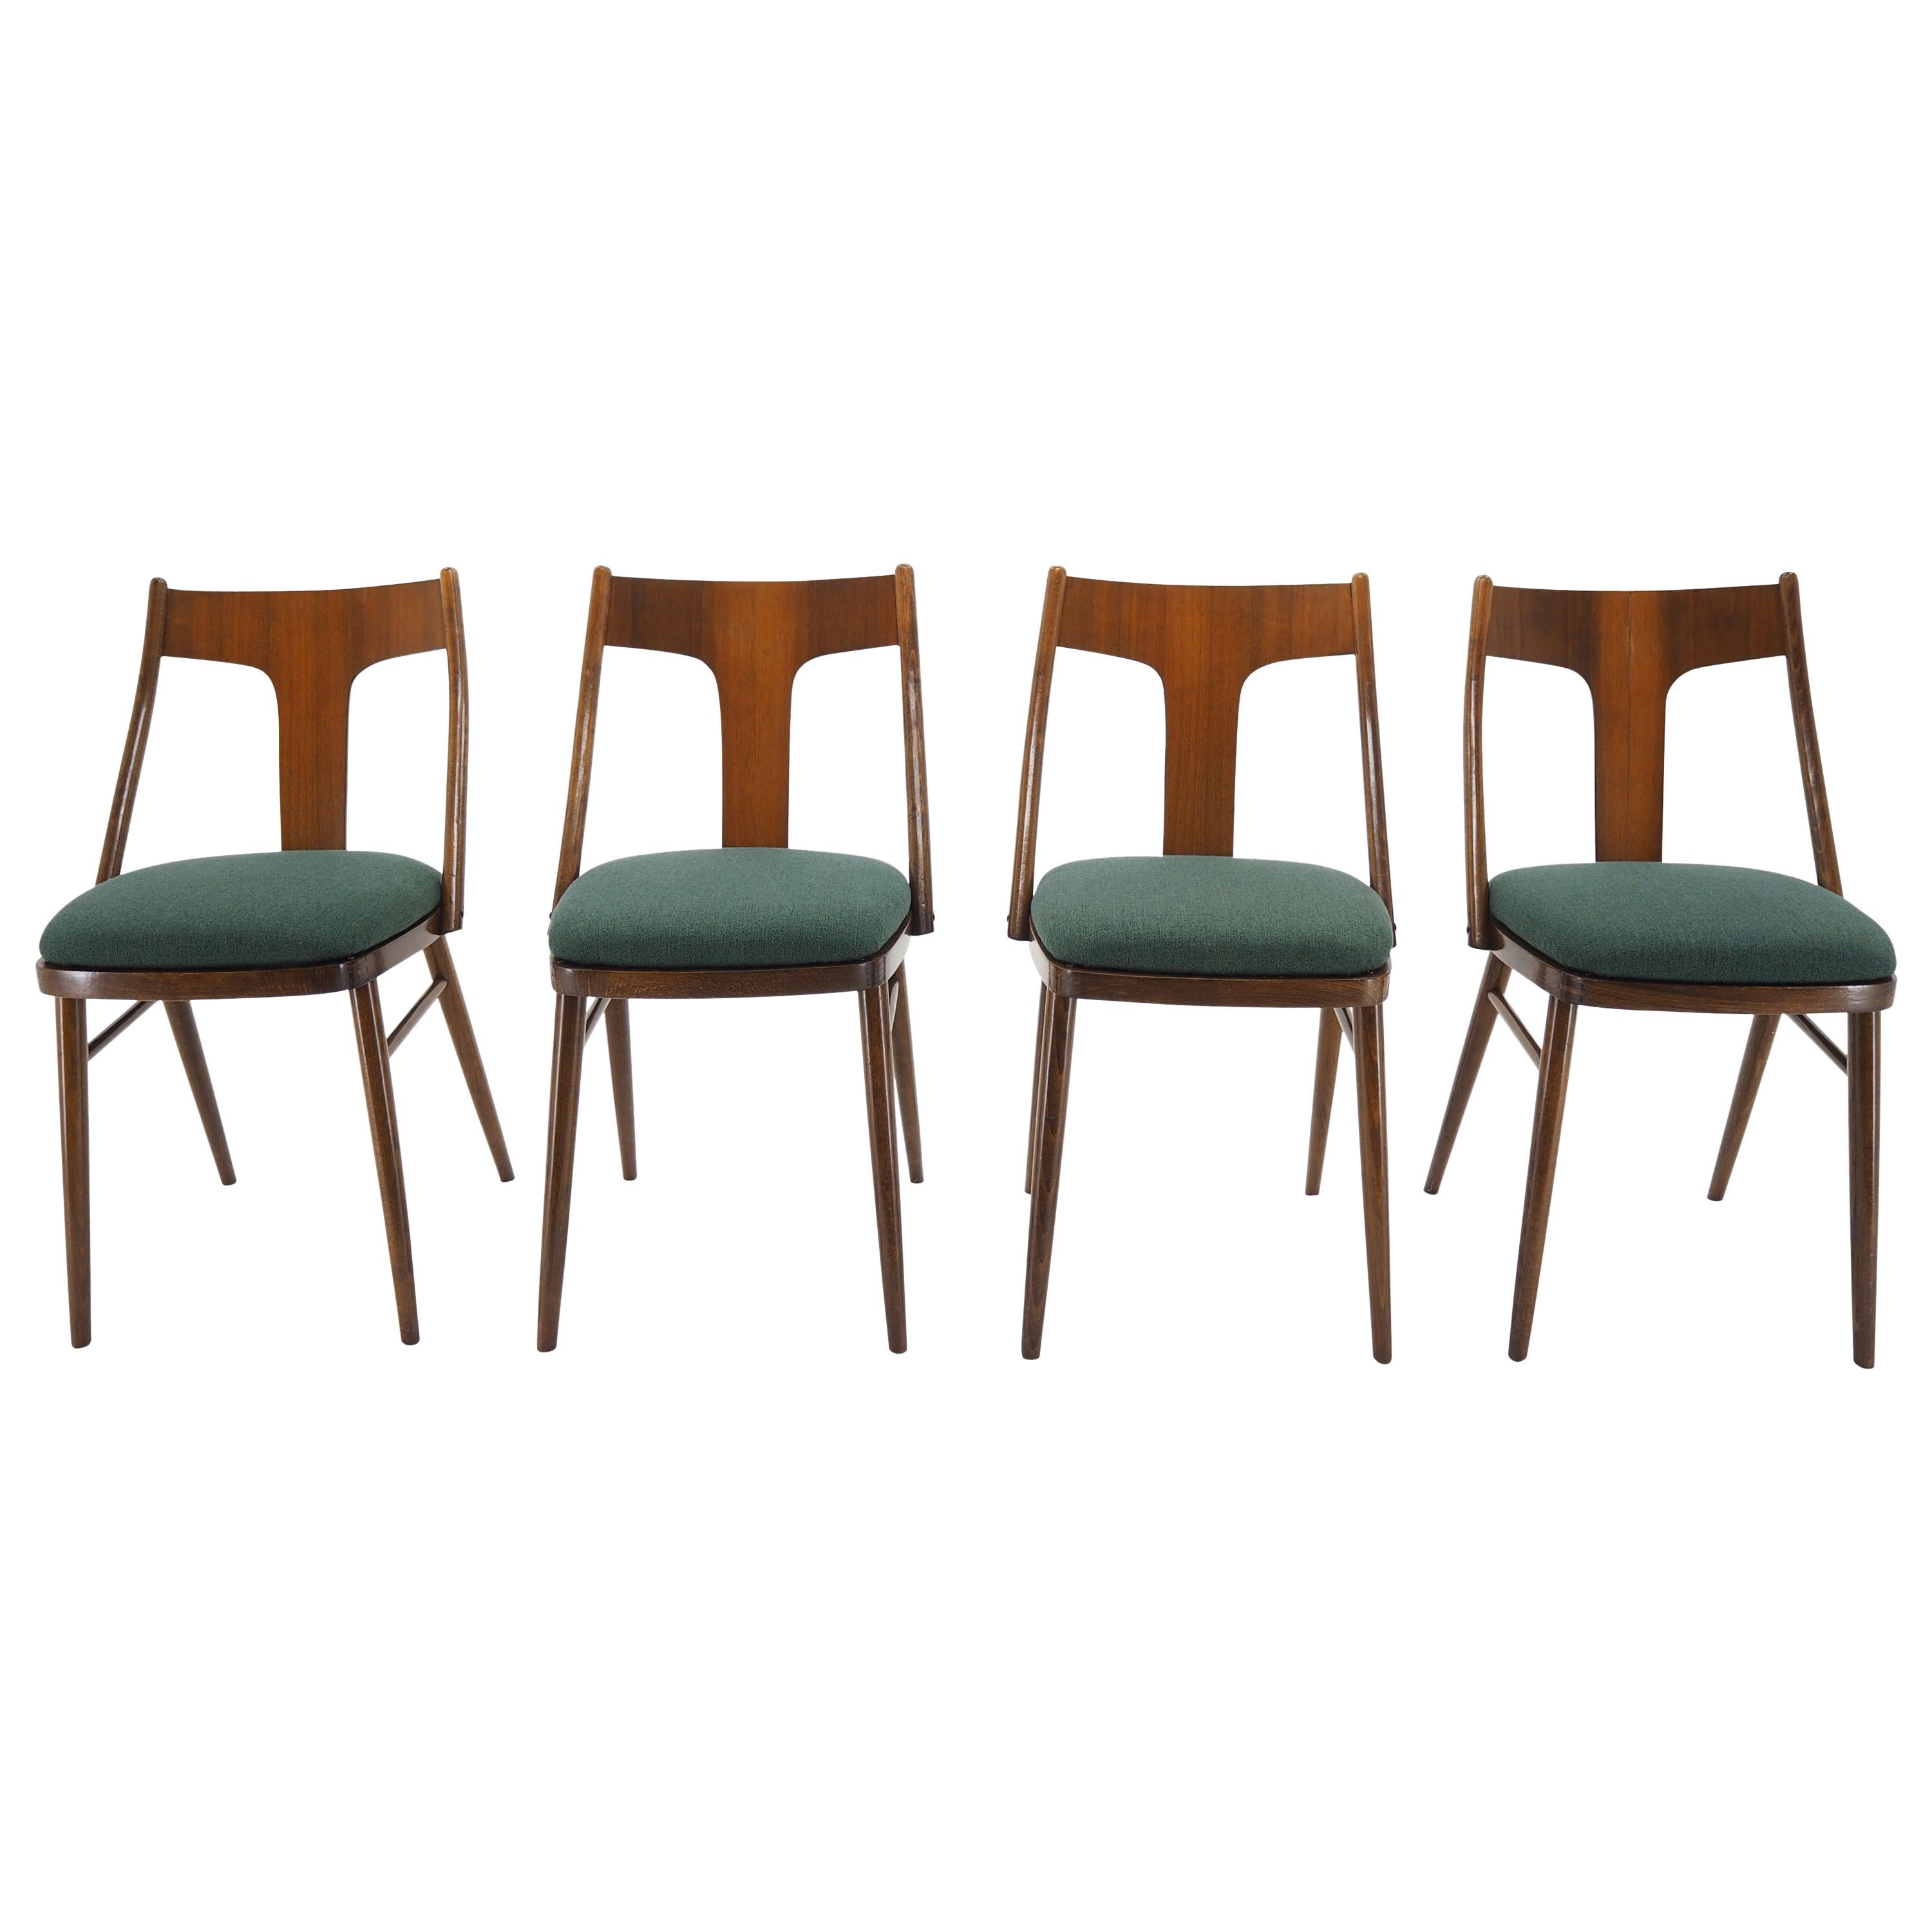 1960s Set of Four Dining Chairs, Czechoslovakia